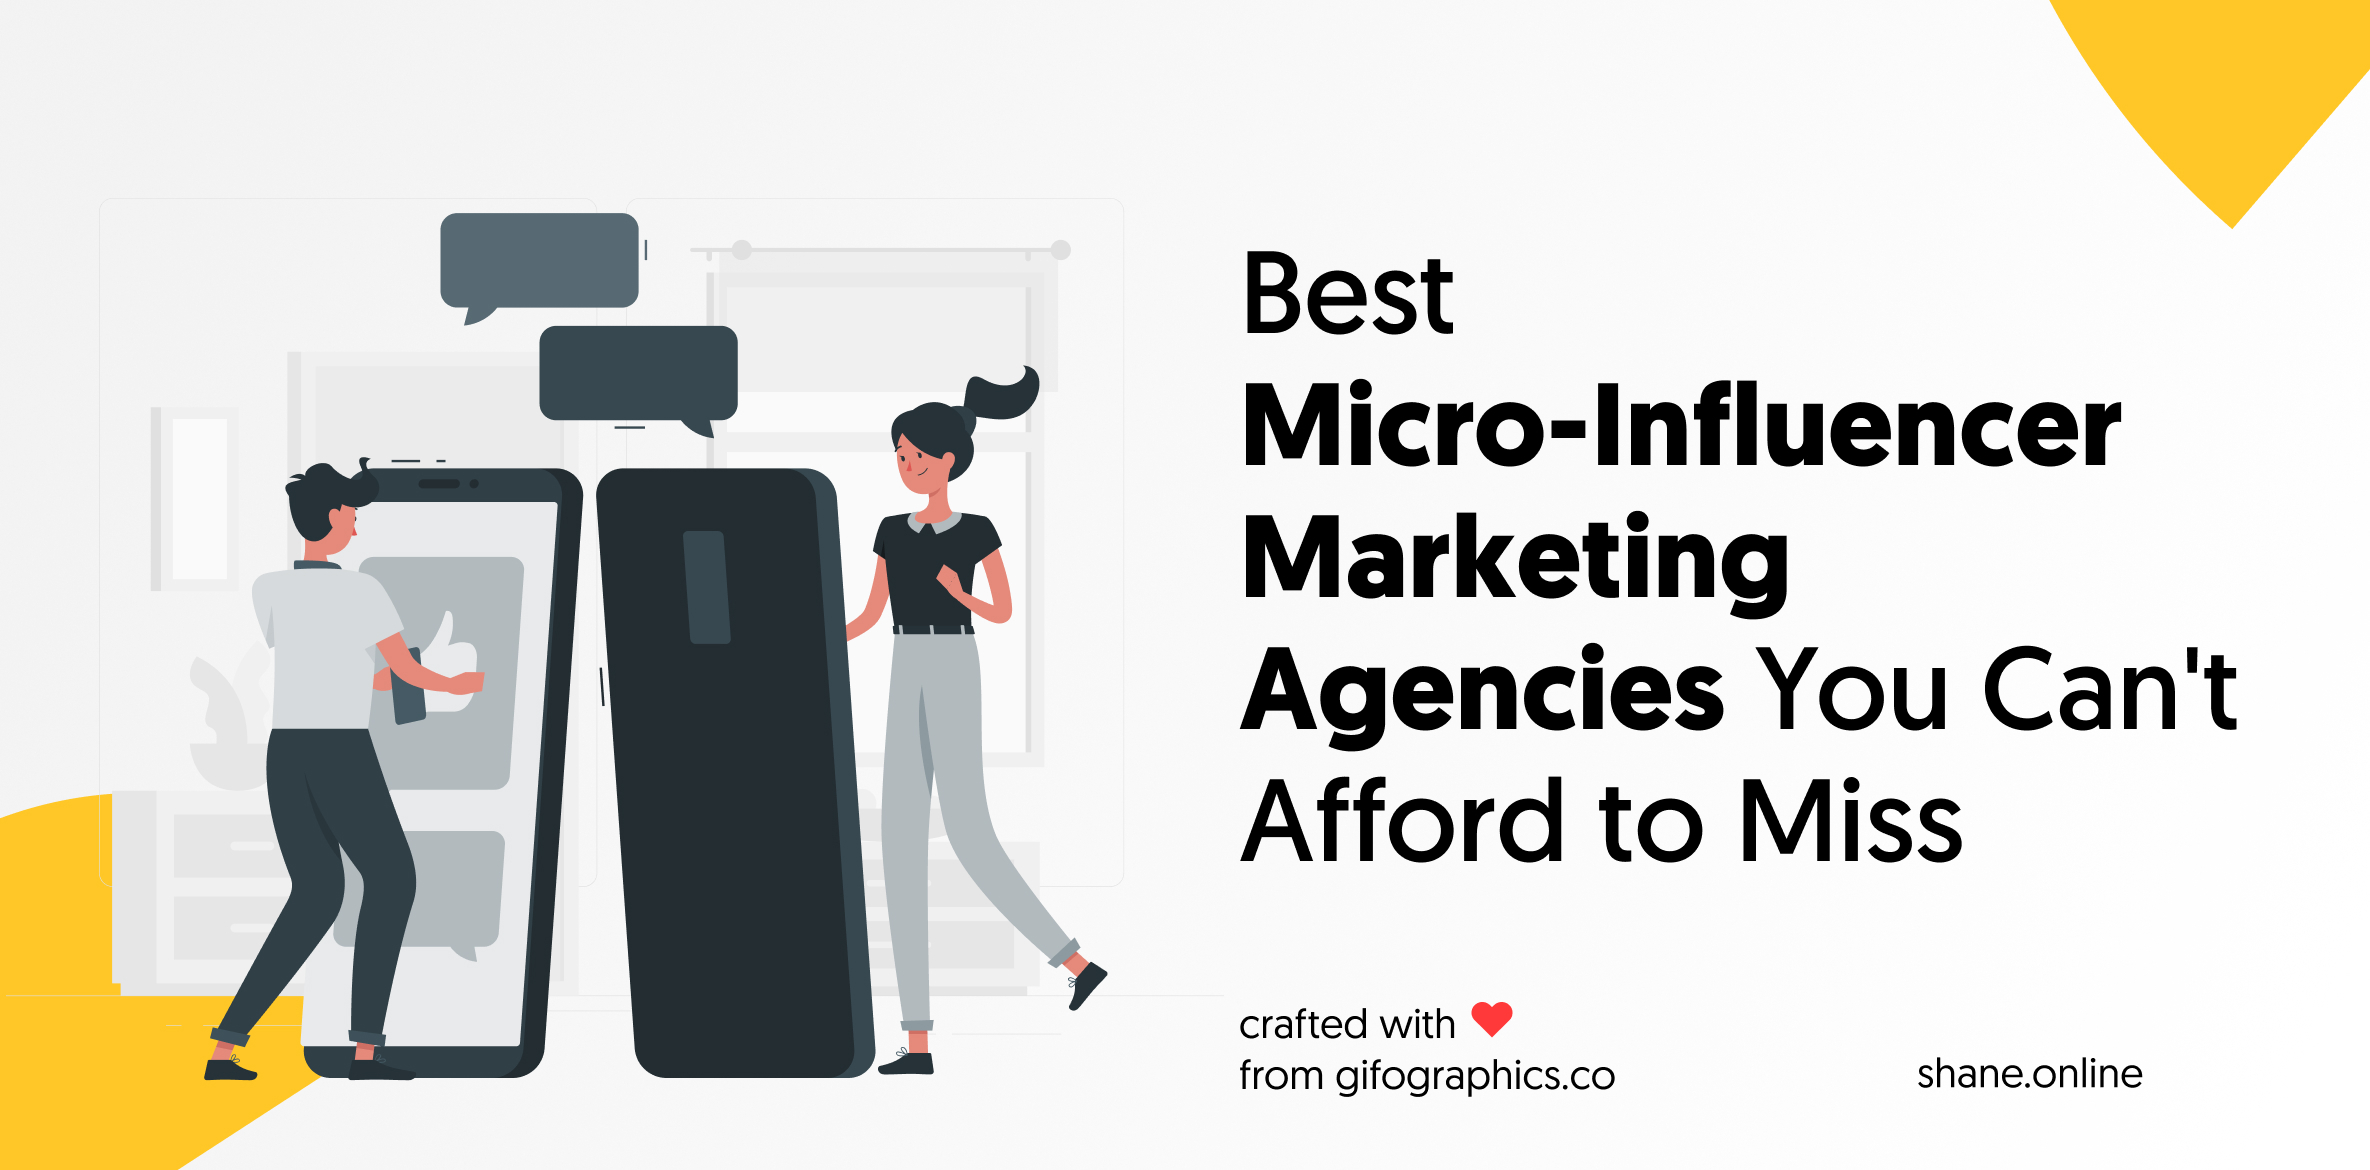 9 Micro-Influencer Marketing Agencies You Can’t Afford to Miss